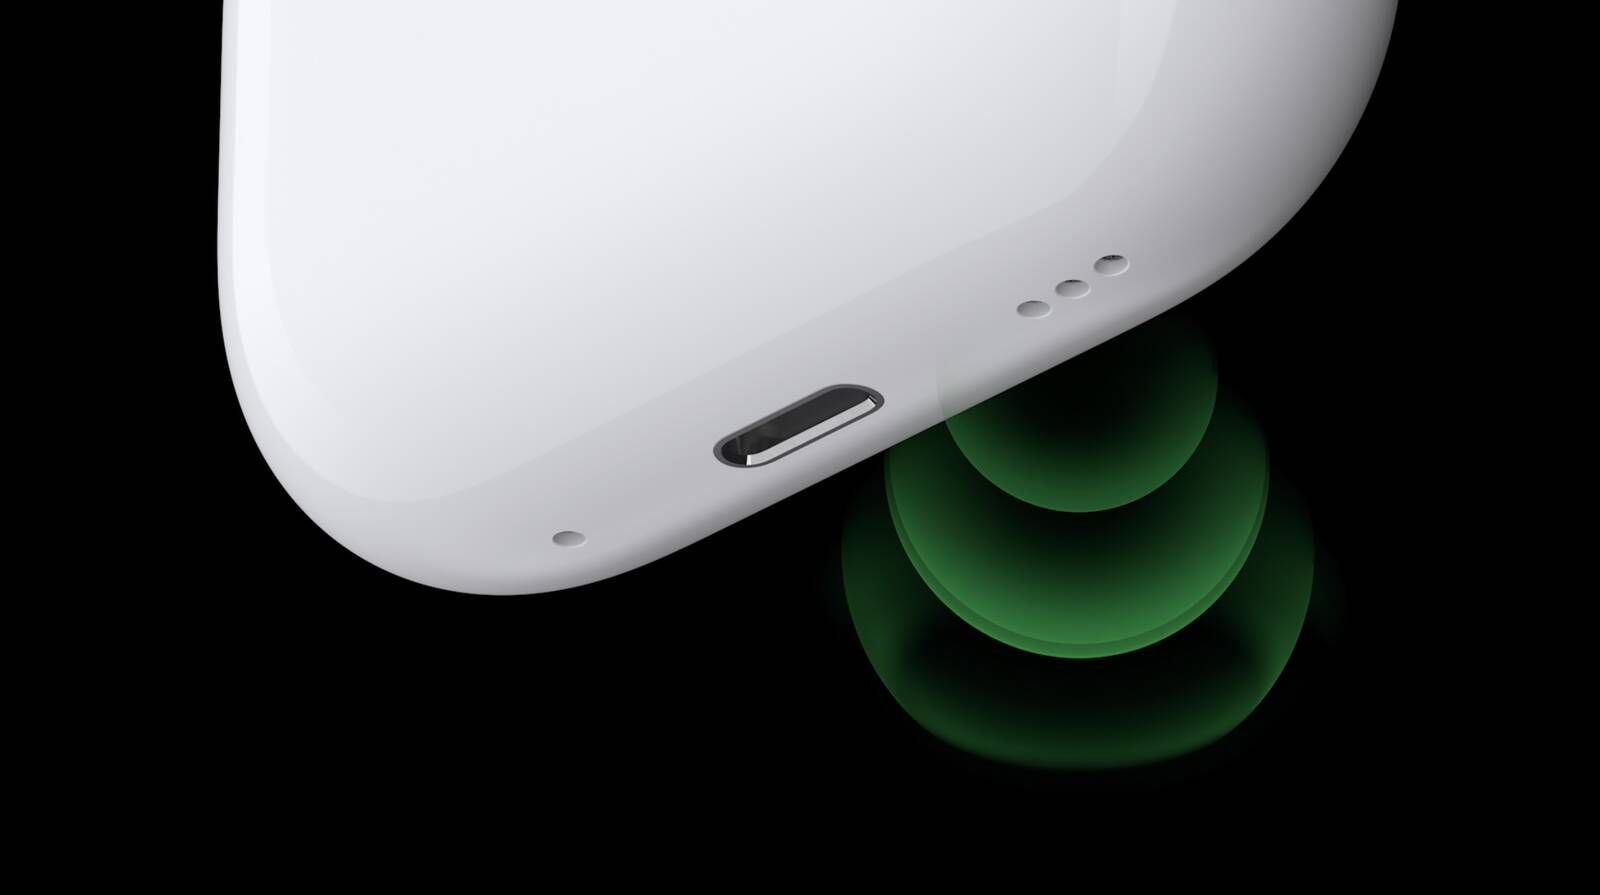 From iPhoneIslam.com, AirPods 4 wireless charging case on a black background with a green glow reflecting underneath.